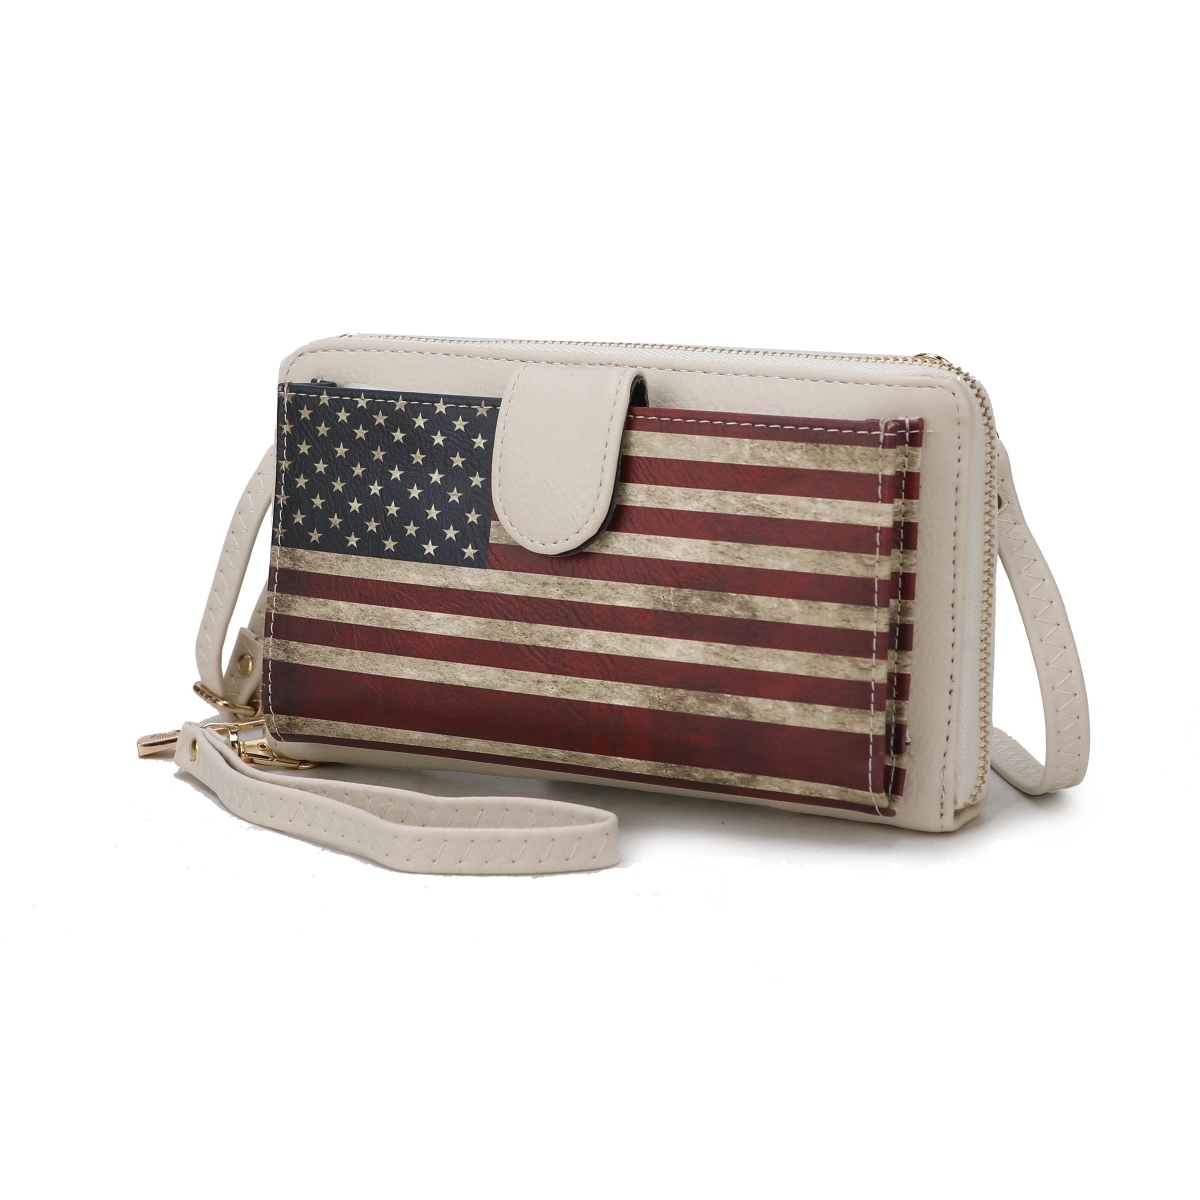 Picture of MKF Collection by Mia K. MKF-FG7406BG Kiara Smartphone and Wallet Convertible FLAG Crossbody Bag